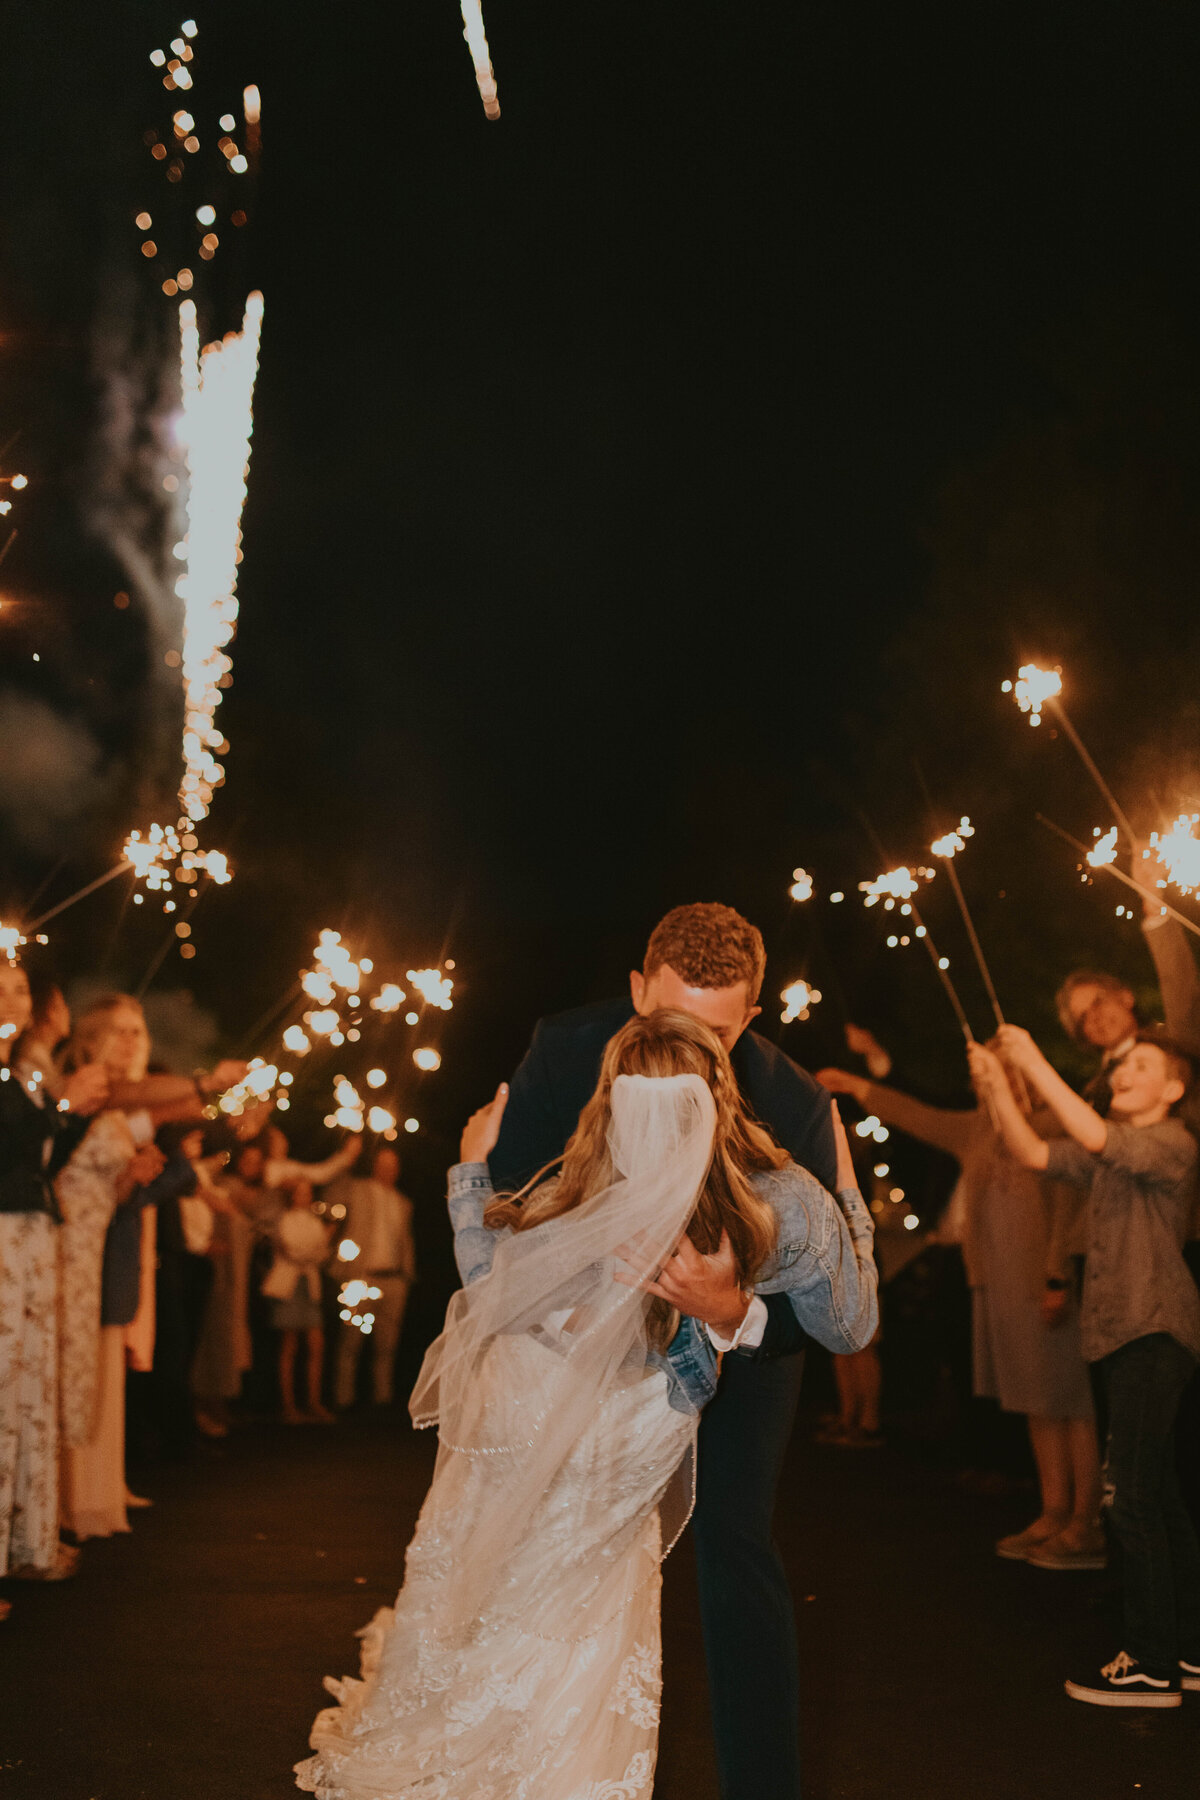 A couple kiss in front of family holding sparklers all around.